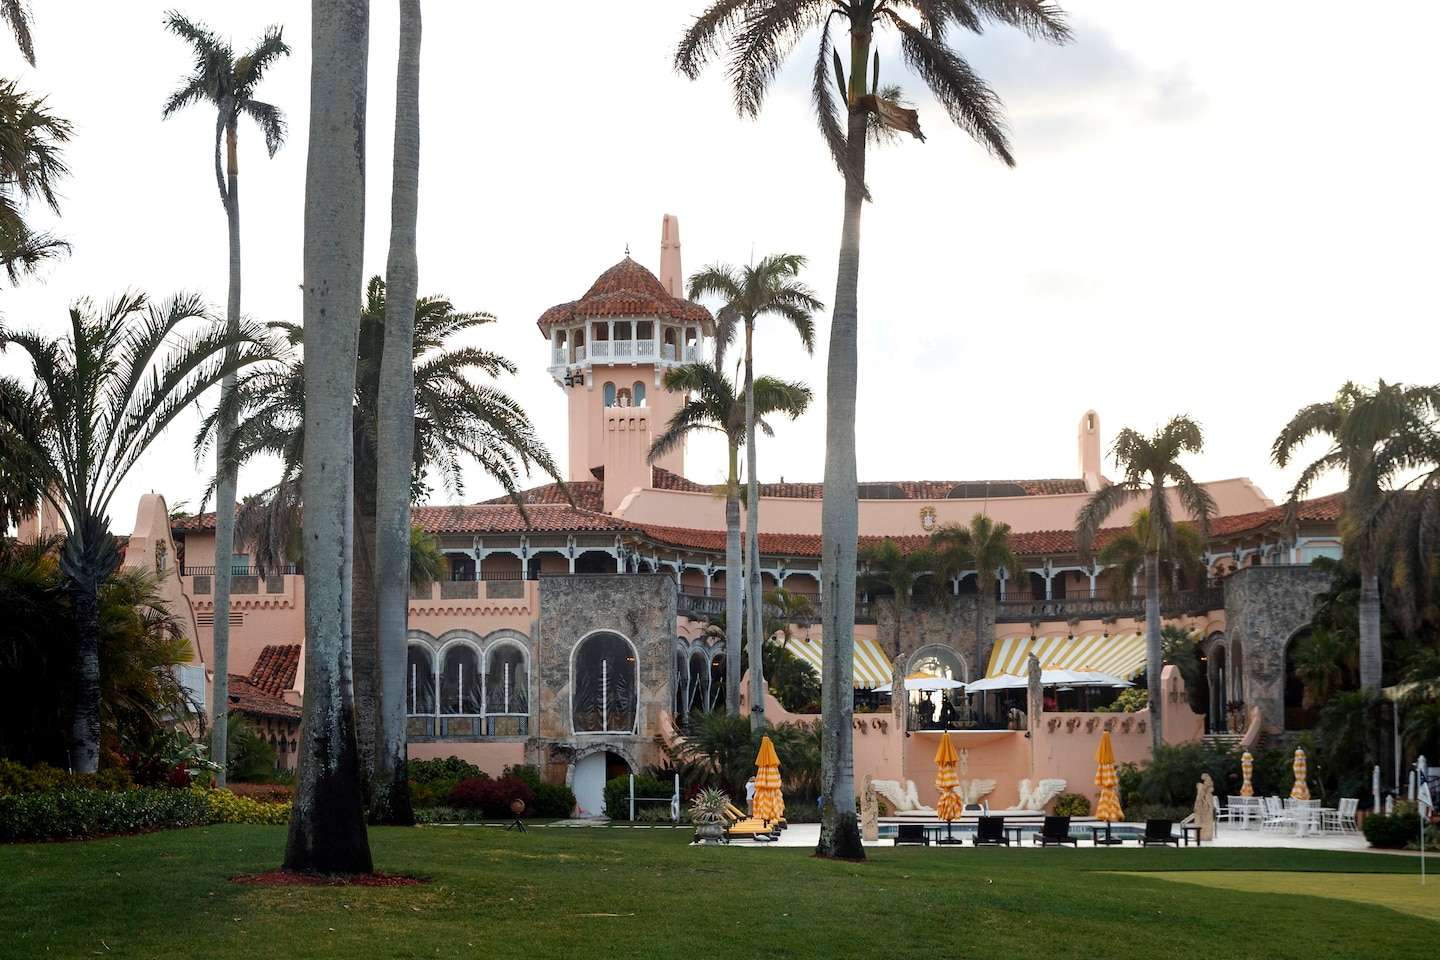 Key Mar-a-Lago witness said to be former White House employee